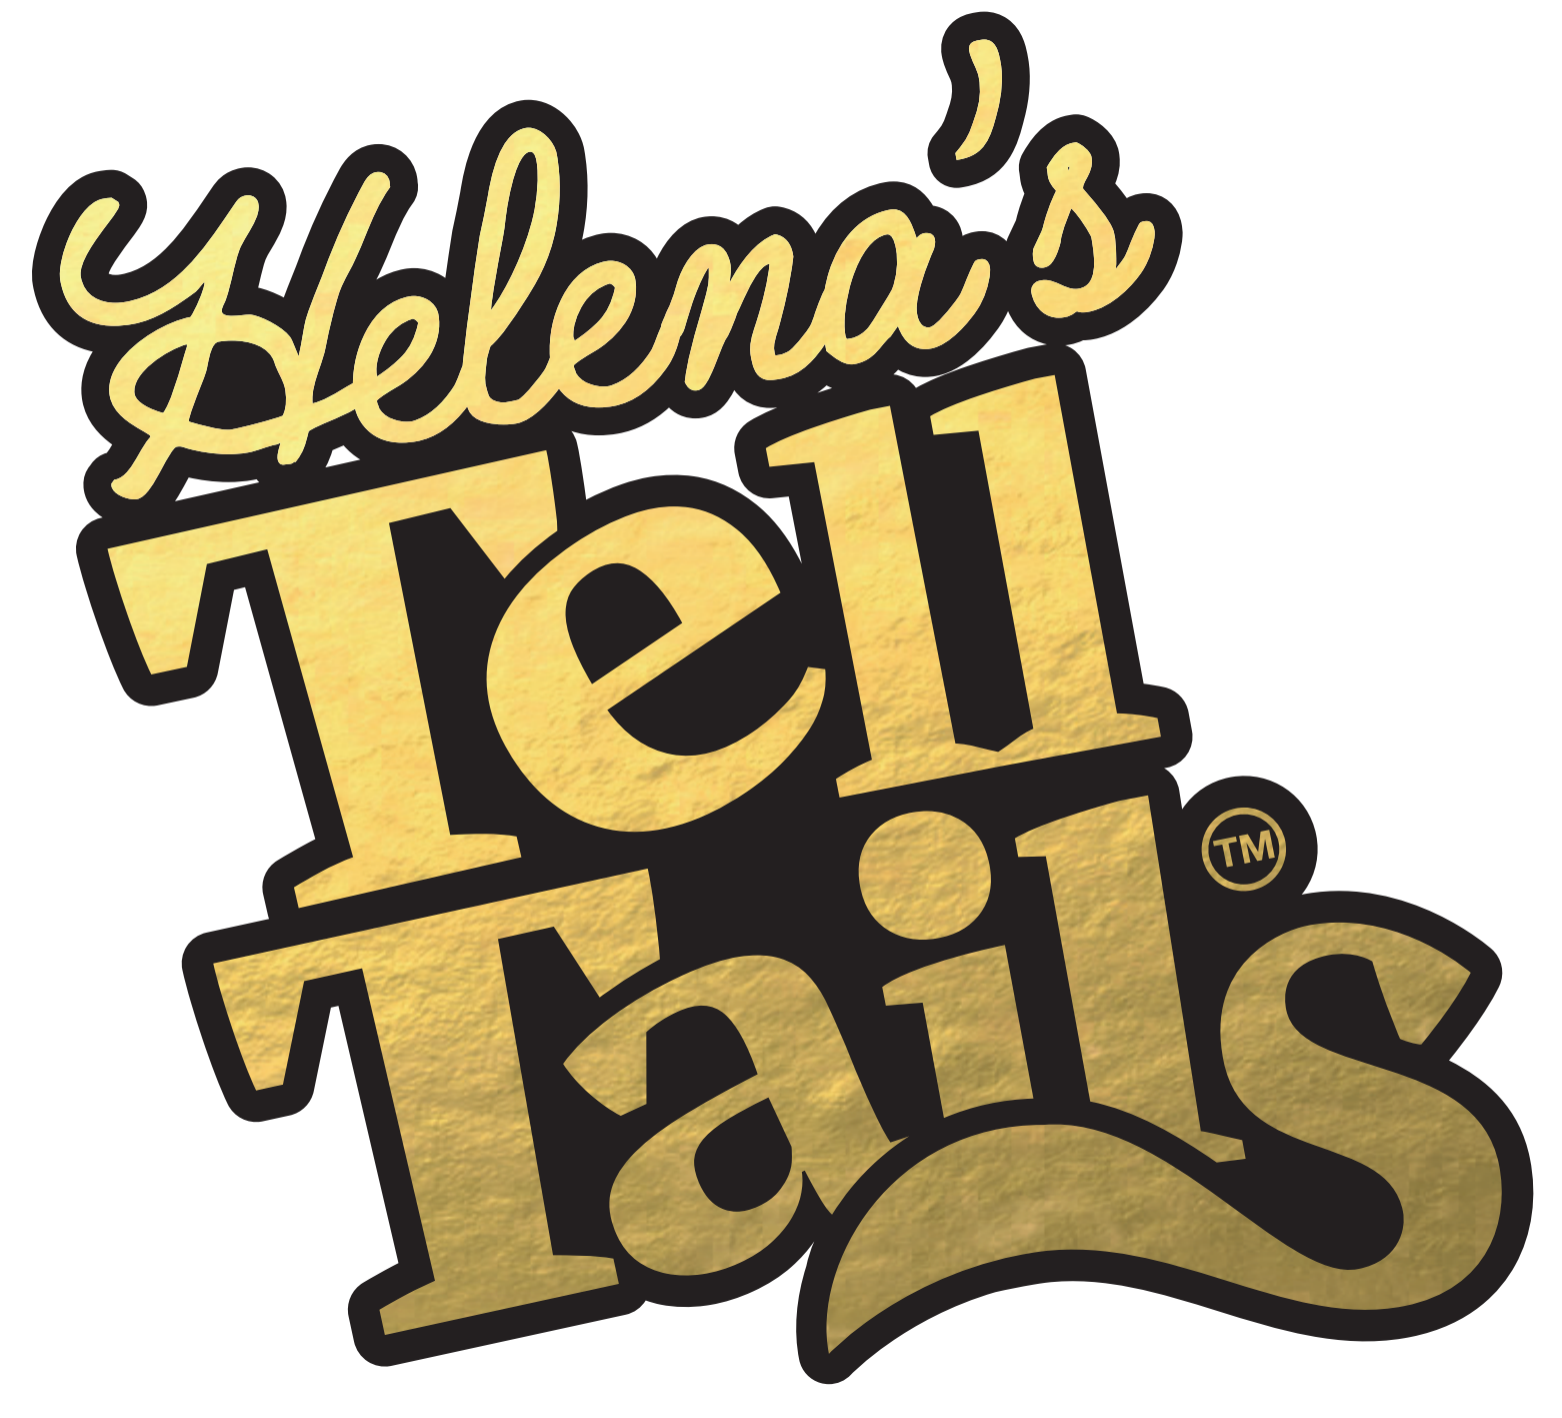 Helena's Tell Tails